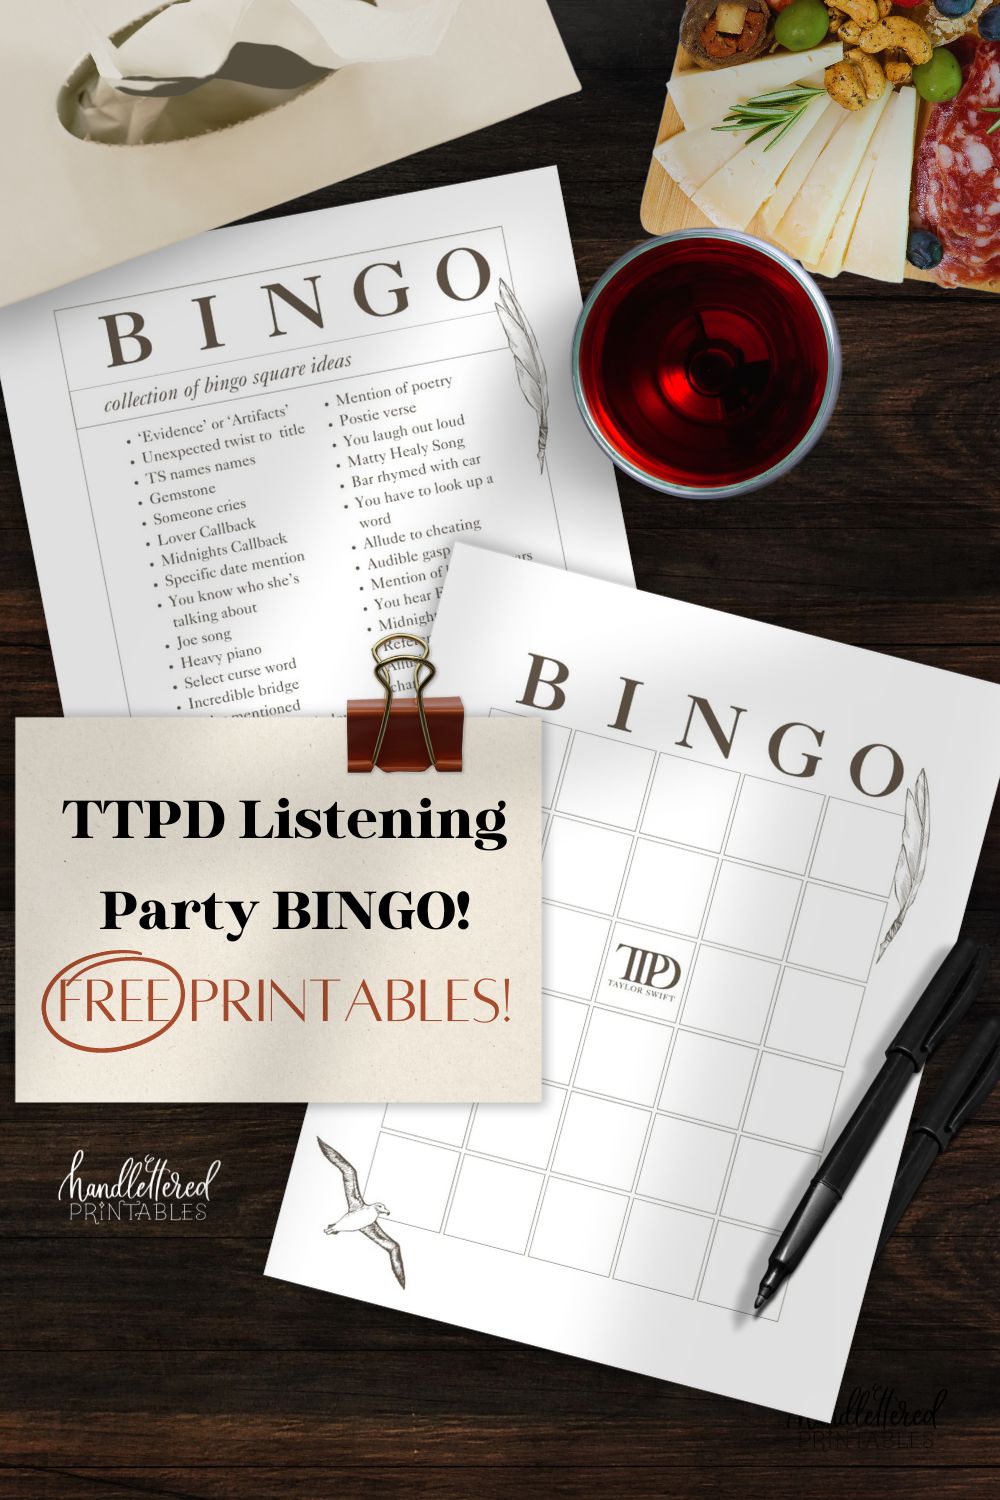 image of printed bingo card and suggestion list with a TTPD theme (taylor swift tortured poets department) on a dark wood table with a box of tissues, charcuterie board, glass of wine and pen. Title text is styled on a note card and reads: TTPD Listening Party bingo! FREE printables.